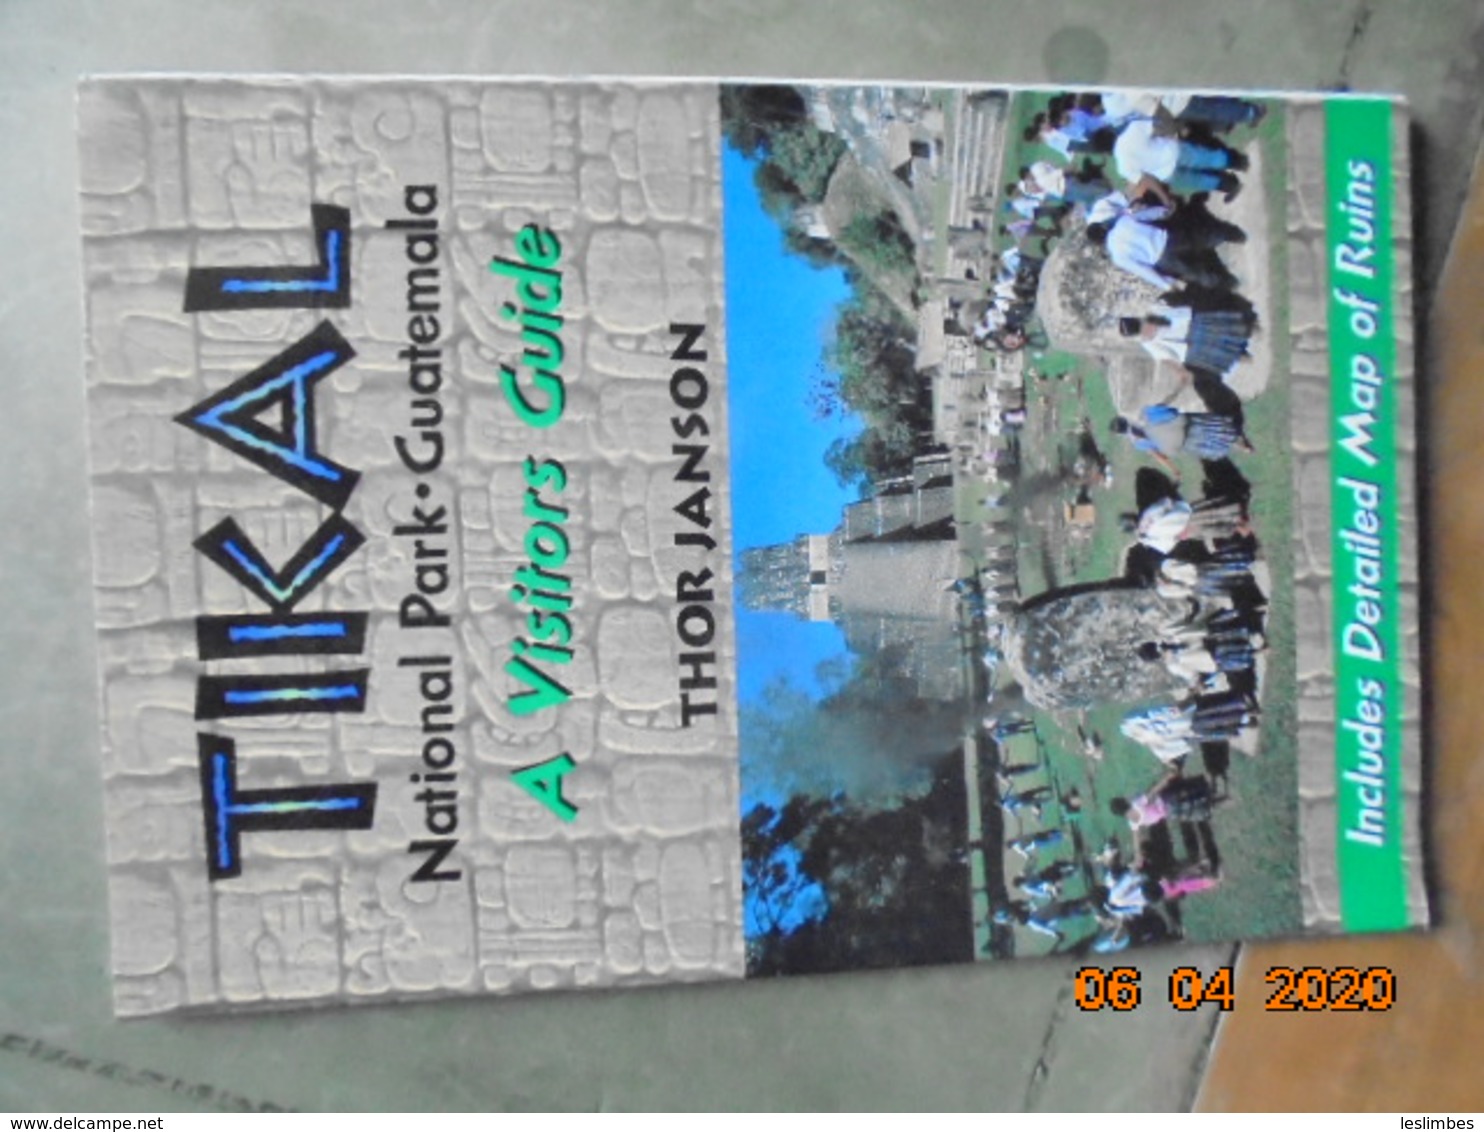 Tikal National Park, Guatemala: A Visitors Guide By Thor Janson. Editorial Laura Lee 1996. - North America